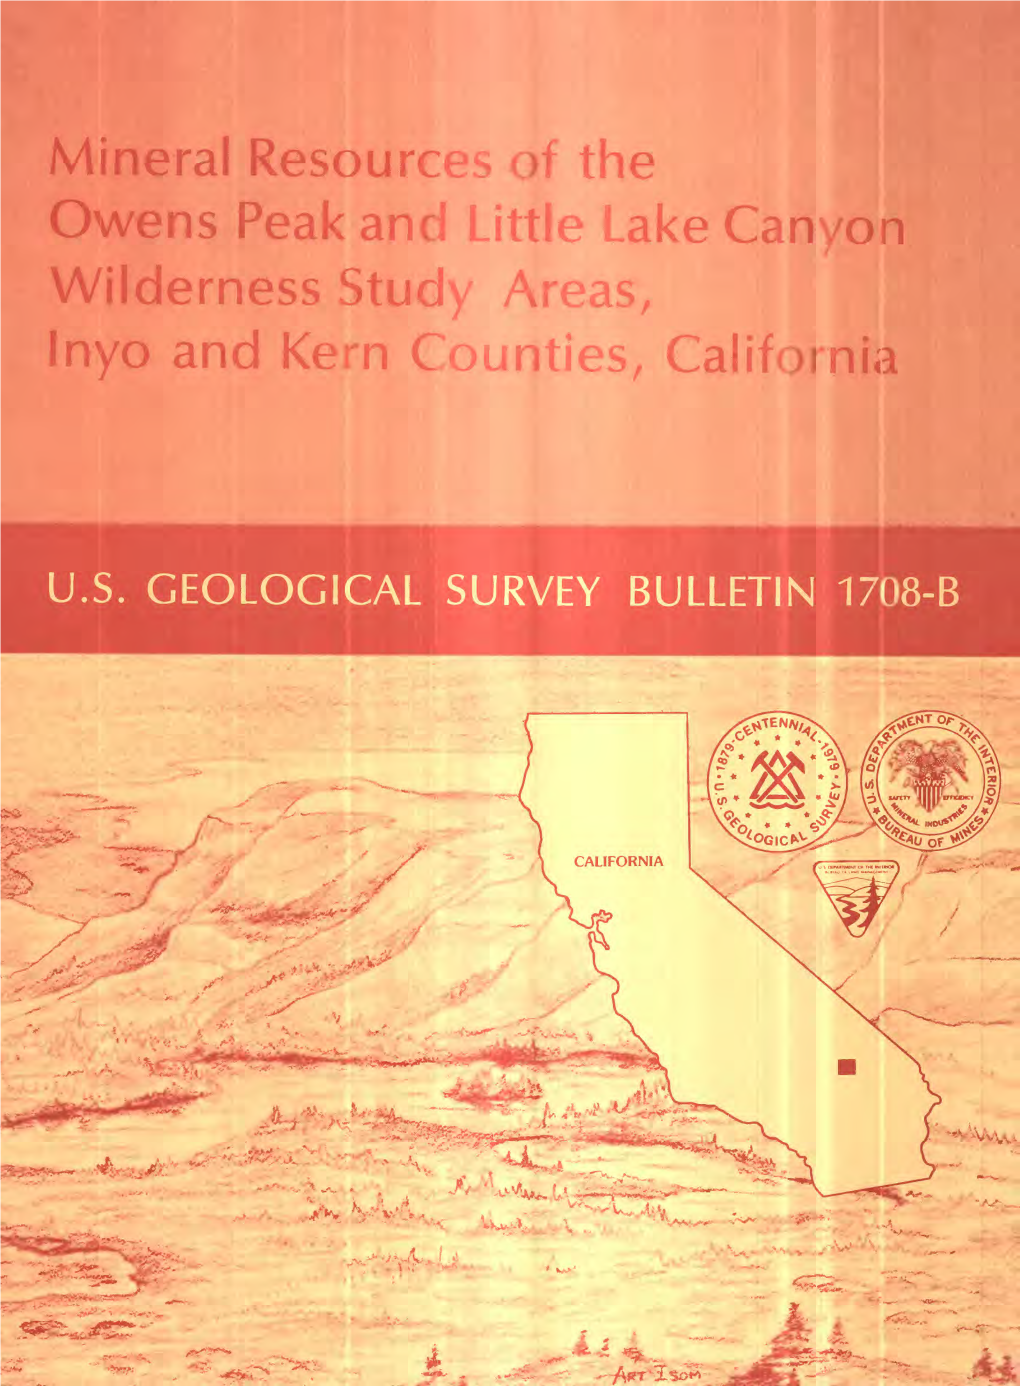 Mineral Resources of the Owens Peak and Little Lake Canyon Wilderness Study Areas, Inyo and Kern Counties, California